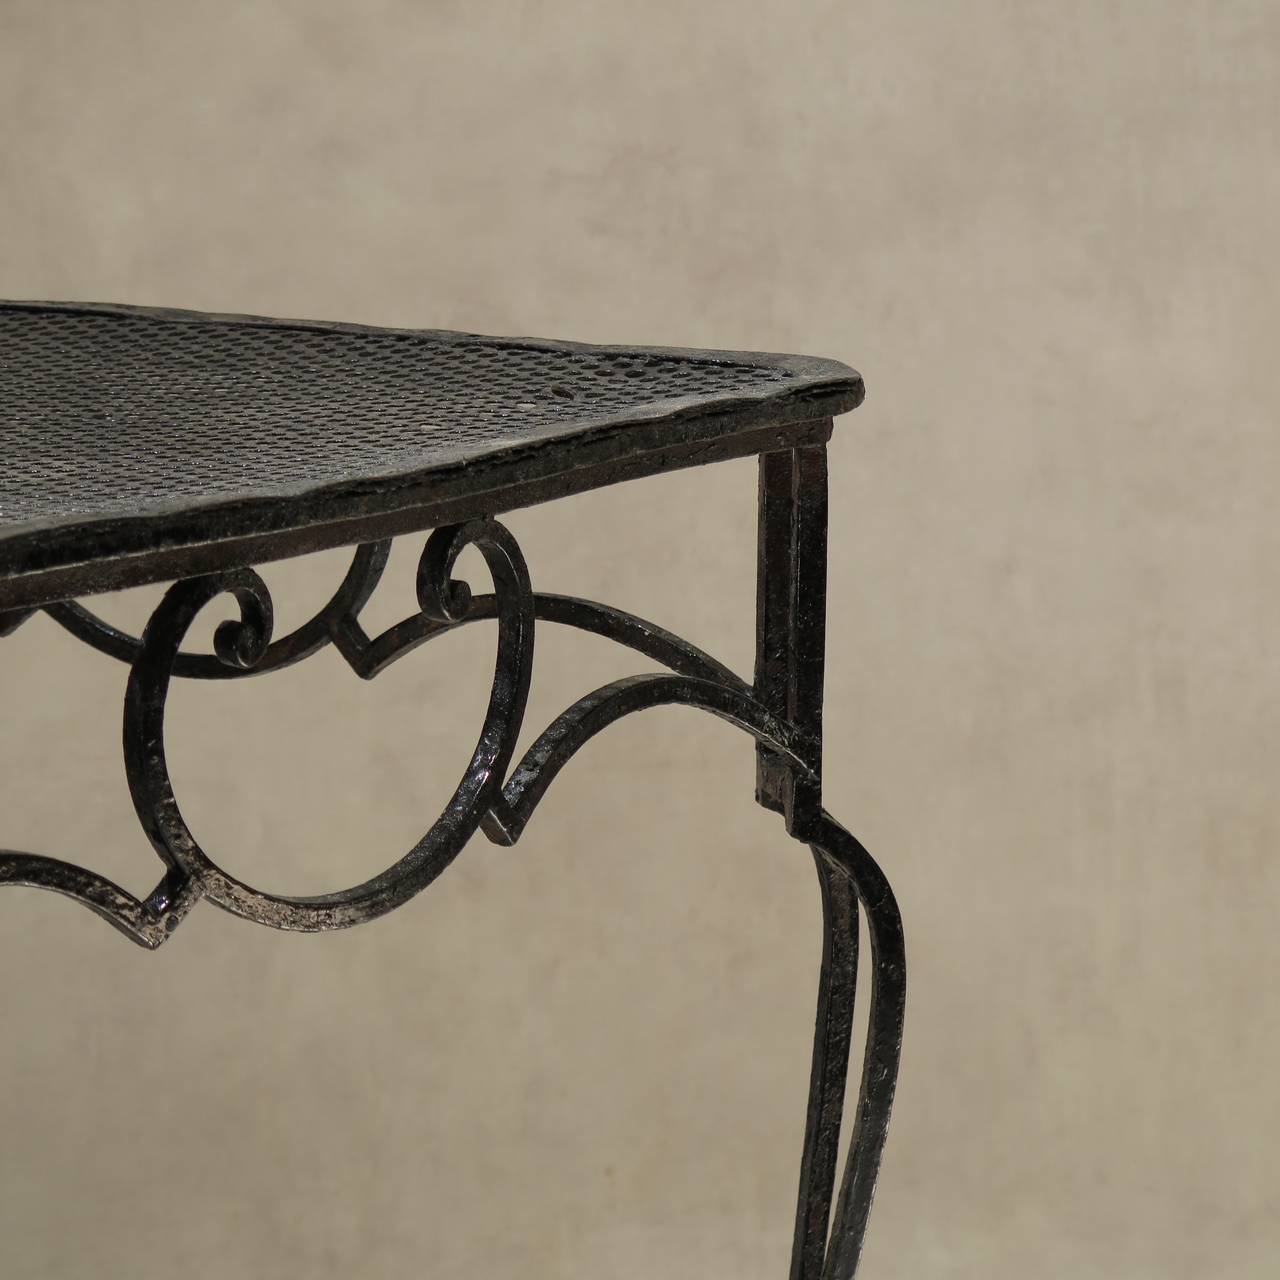 Mid-20th Century Baroque Wrought Iron Table by J.-C. Moreux - France, 1930s For Sale